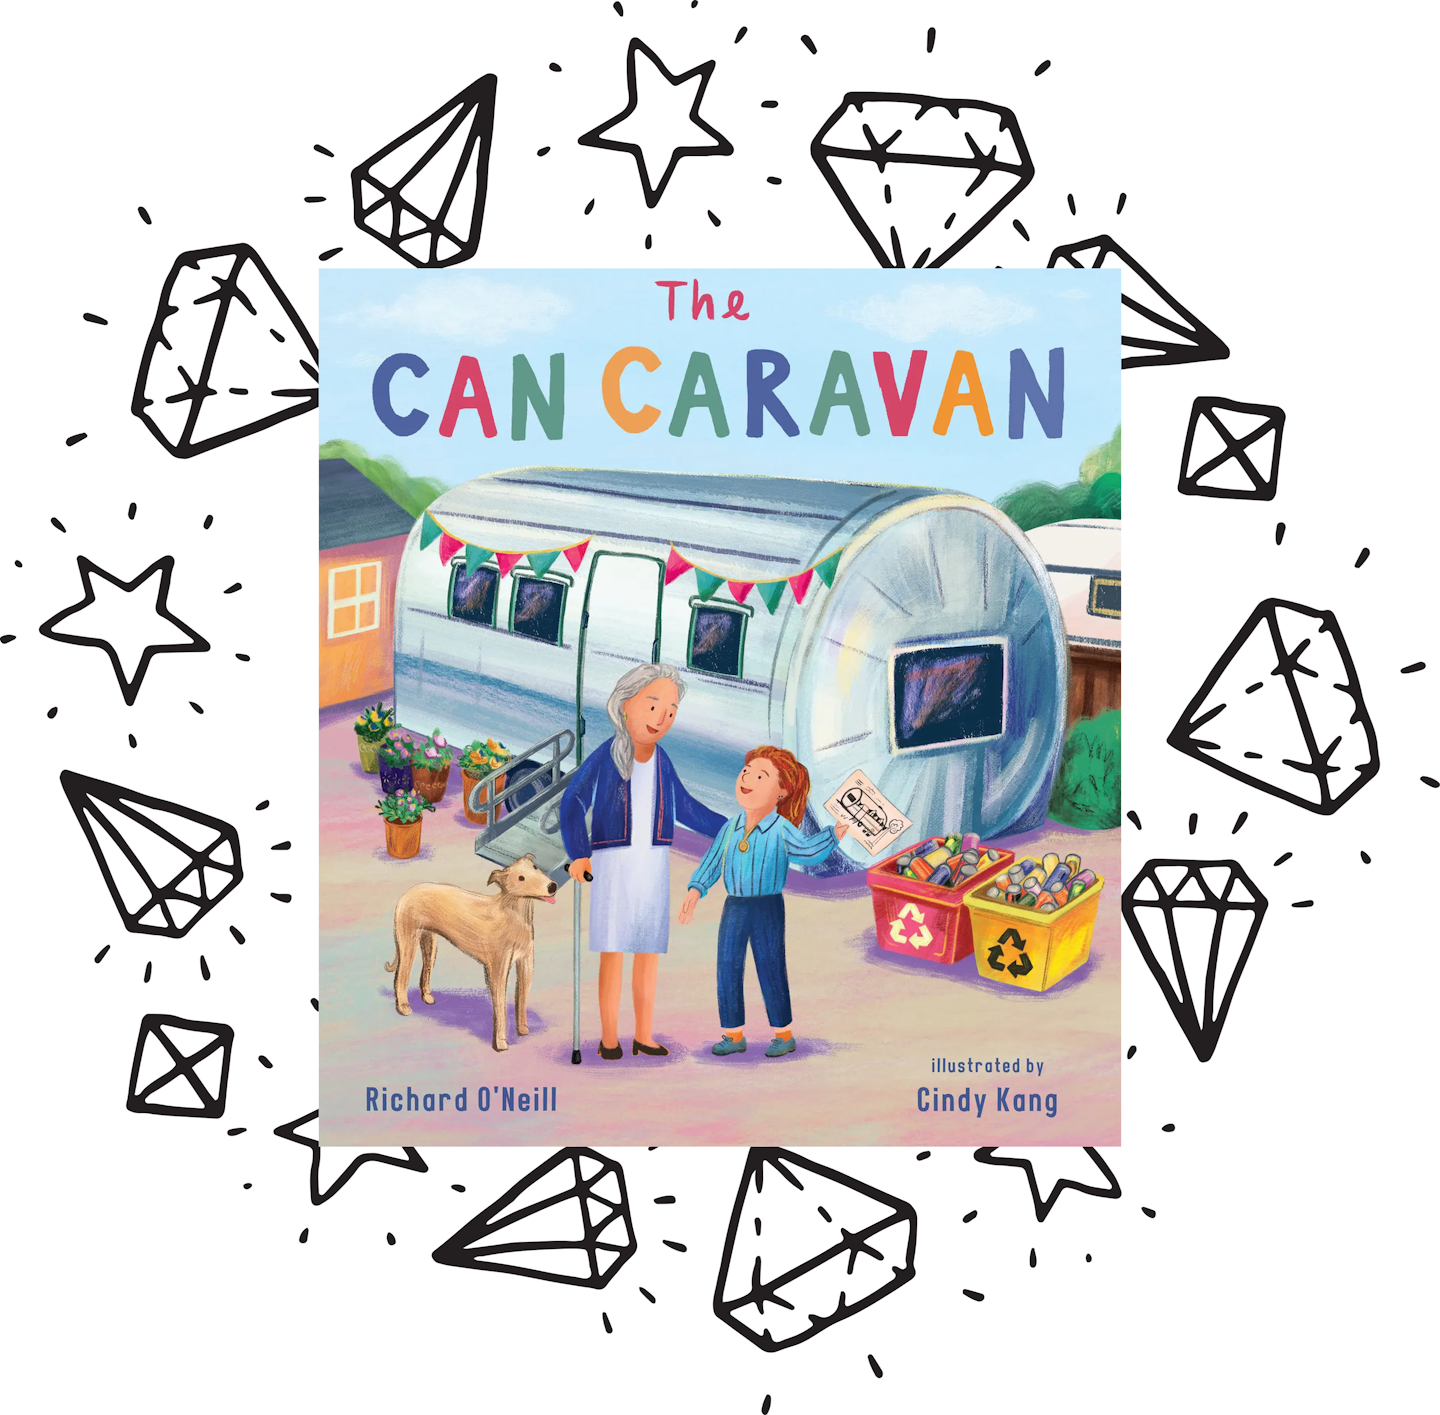 The cover of The Can Caravan on a background of black and white stars and gems.